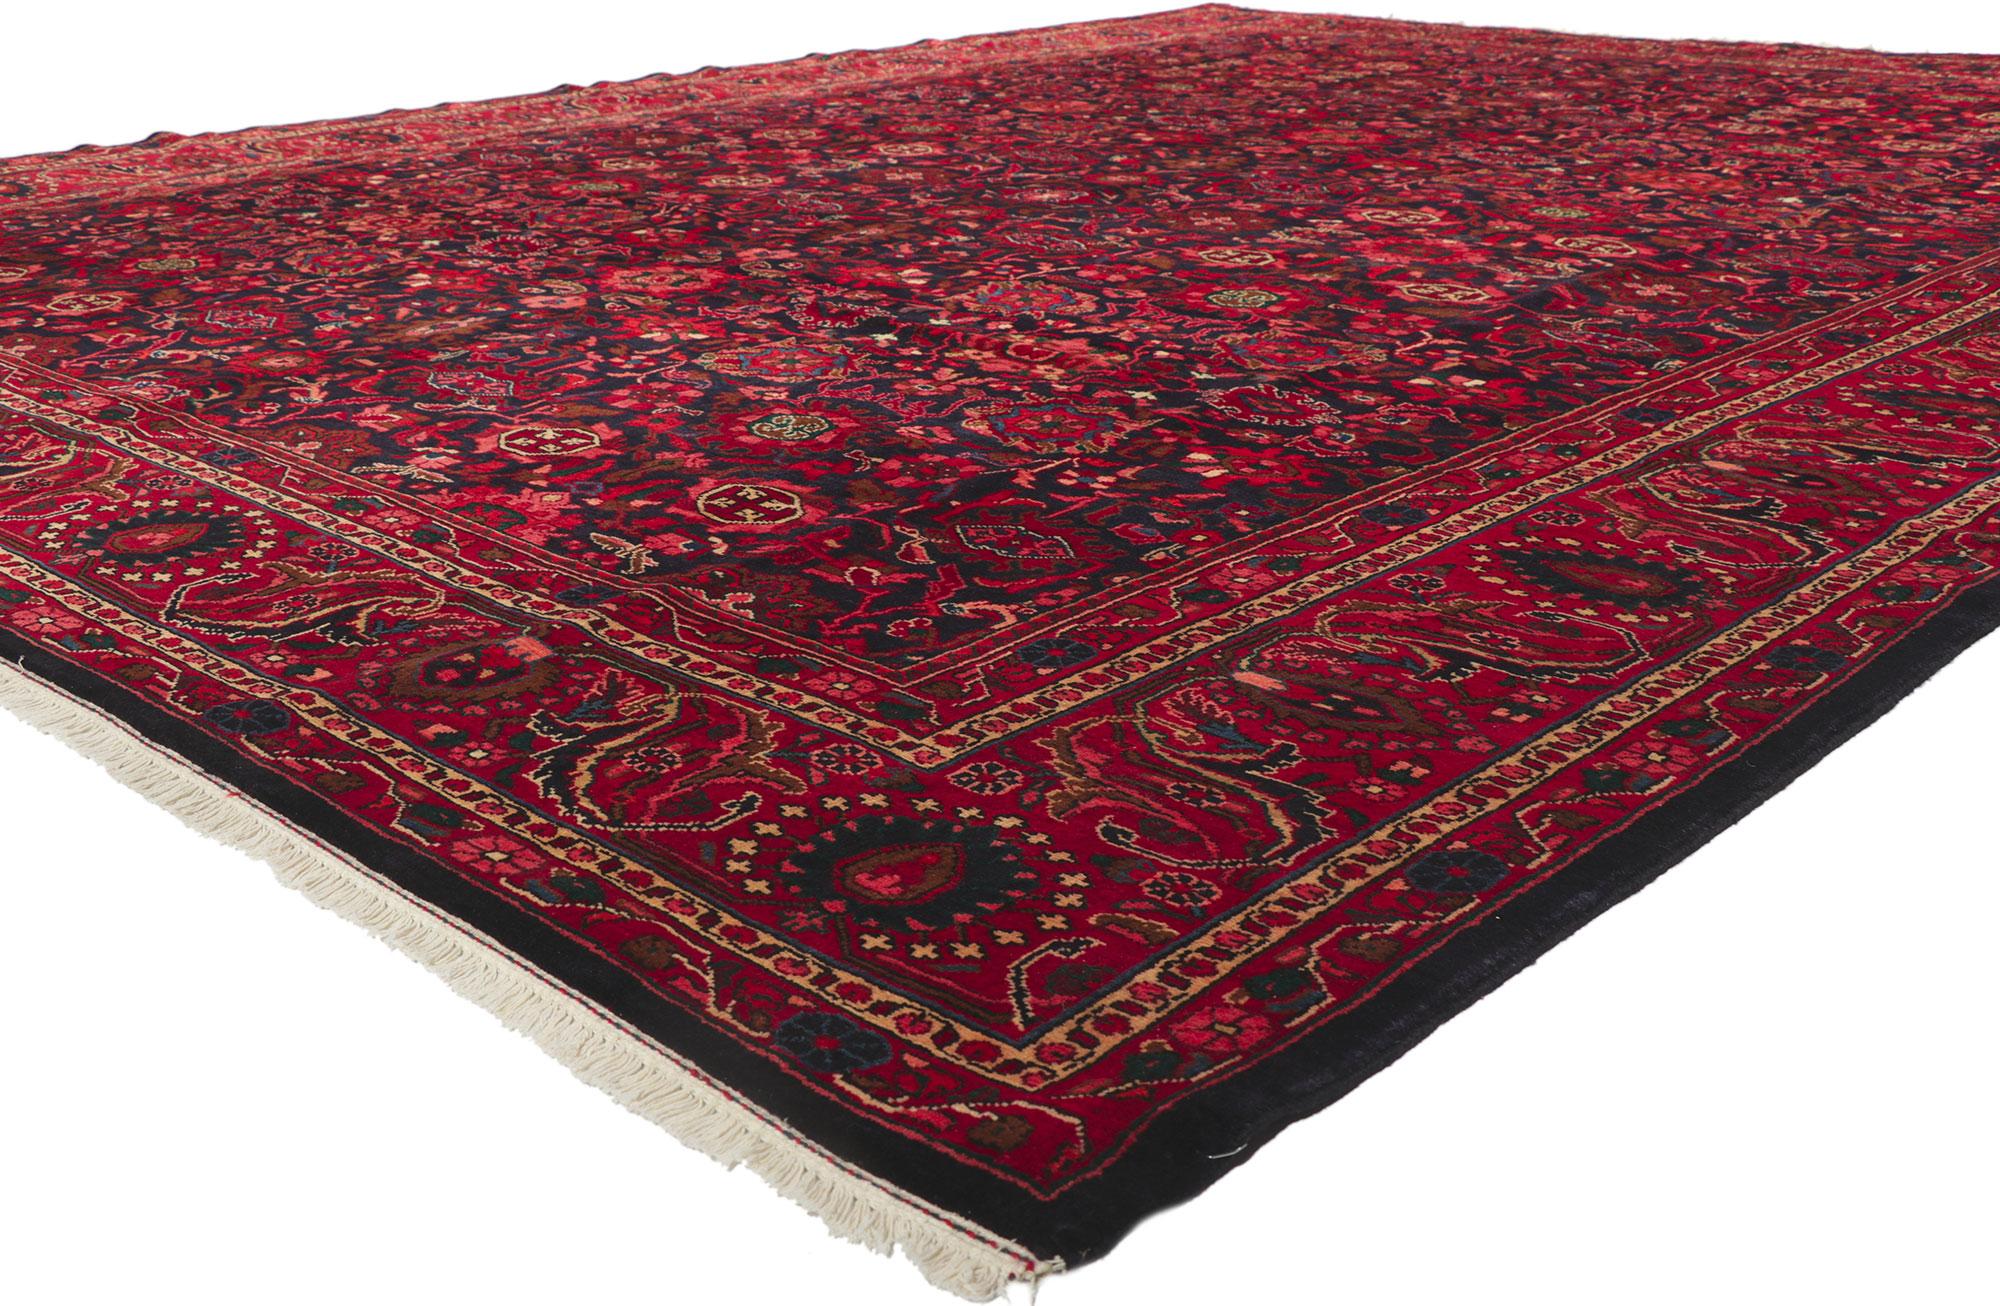 61197 Vintage Persian Malayer Rug, 11'03 x 14'06. Emanating a timeless design and beguiling beauty in saturated colors, this hand-knotted wool vintage Persian Malayer rug is poised to impress. An allover repeating botanical pattern spread across the